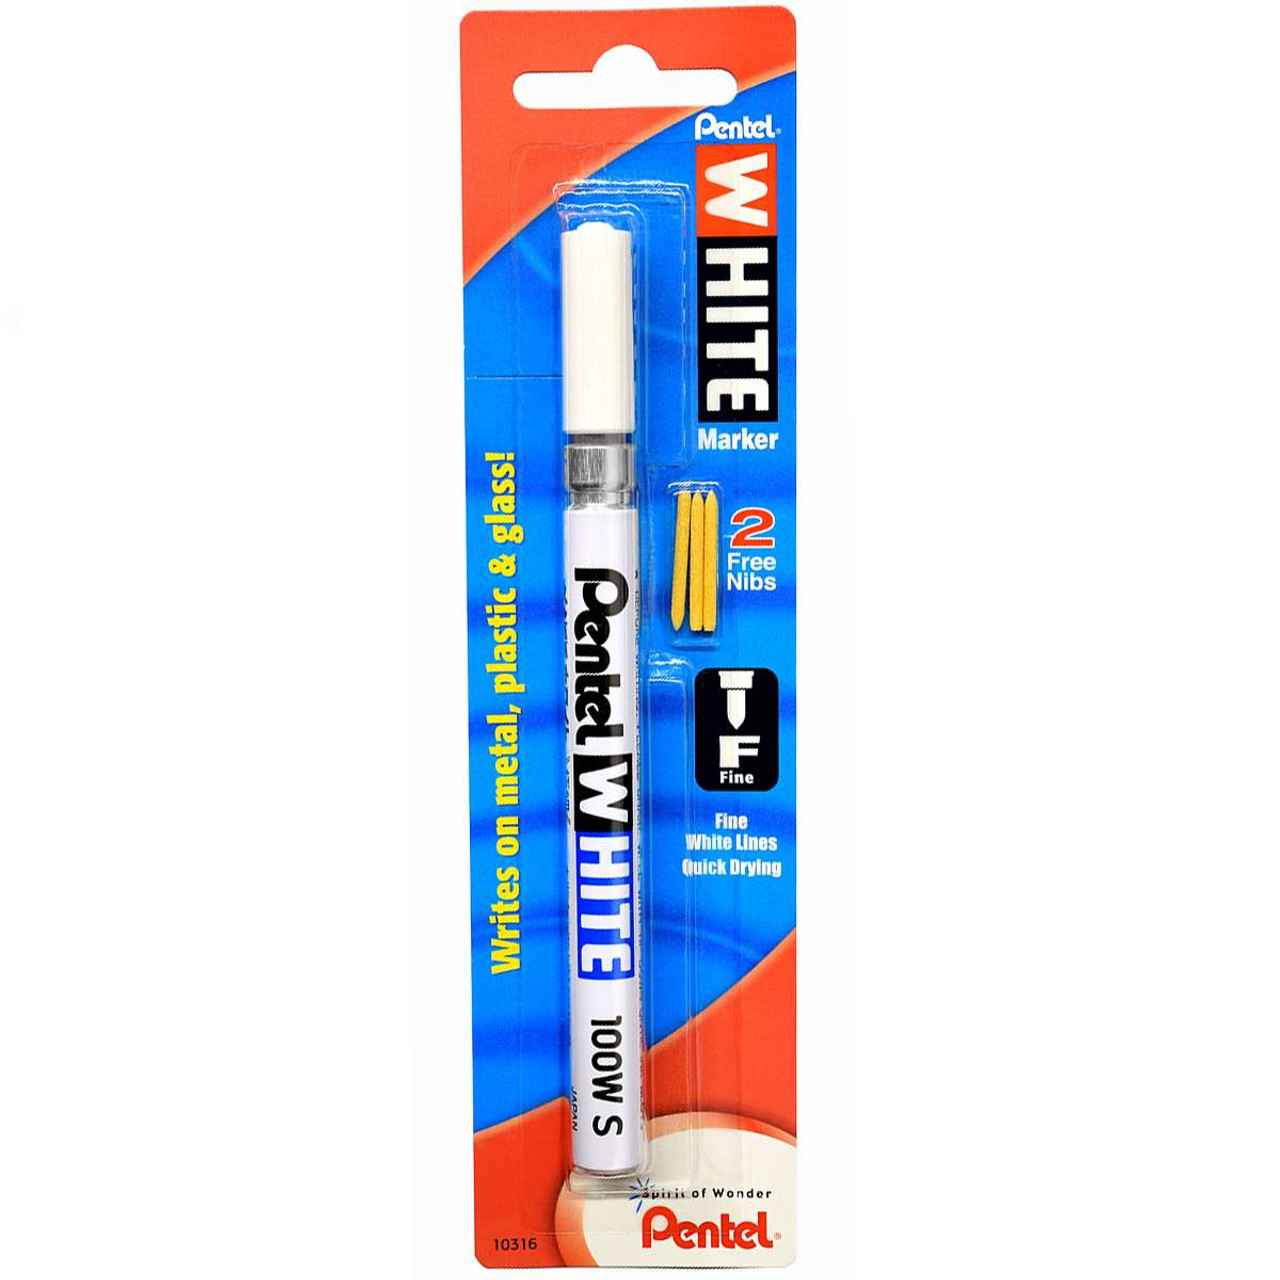 Beading Supplies :: Tools & Supplies :: 1box S Pictured Pentel